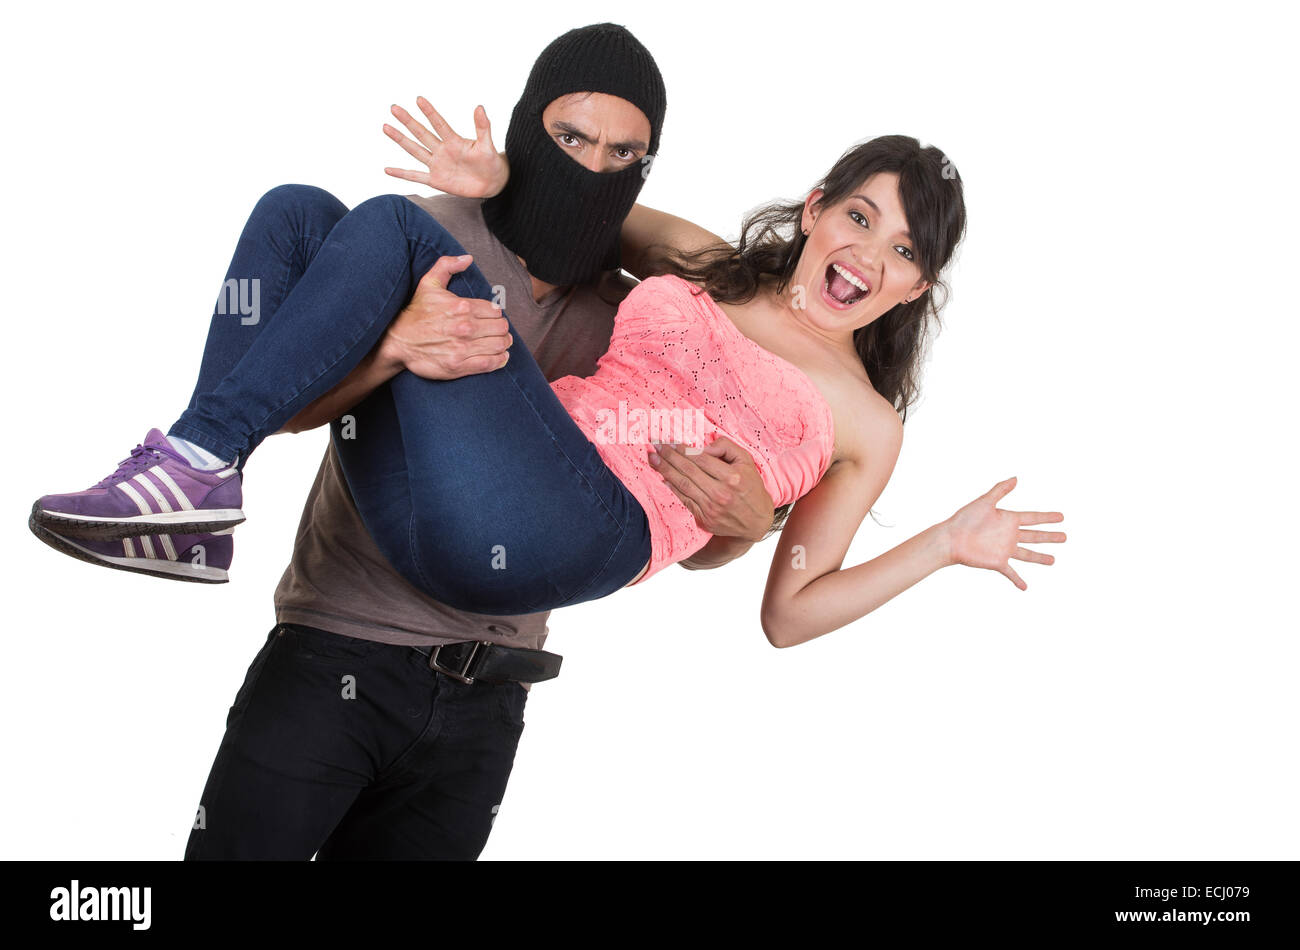 male thief kidnapping carrying young girl Stock Photo